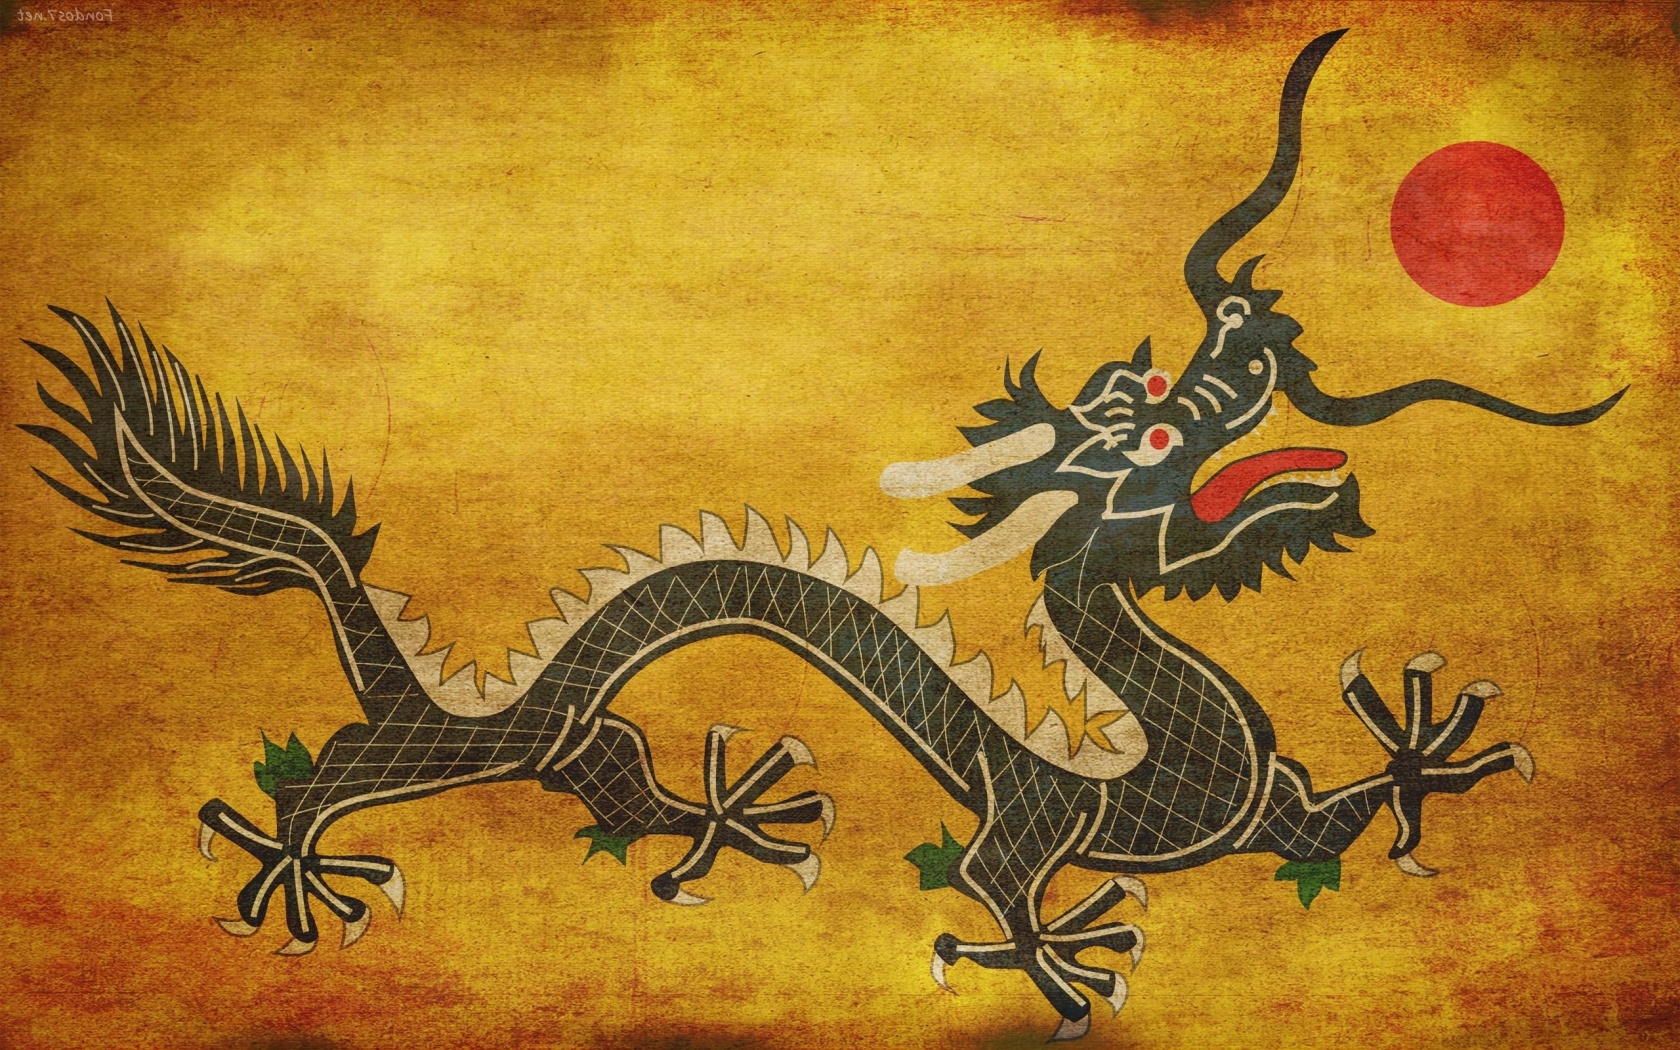 Chinese Dragon Backgrounds